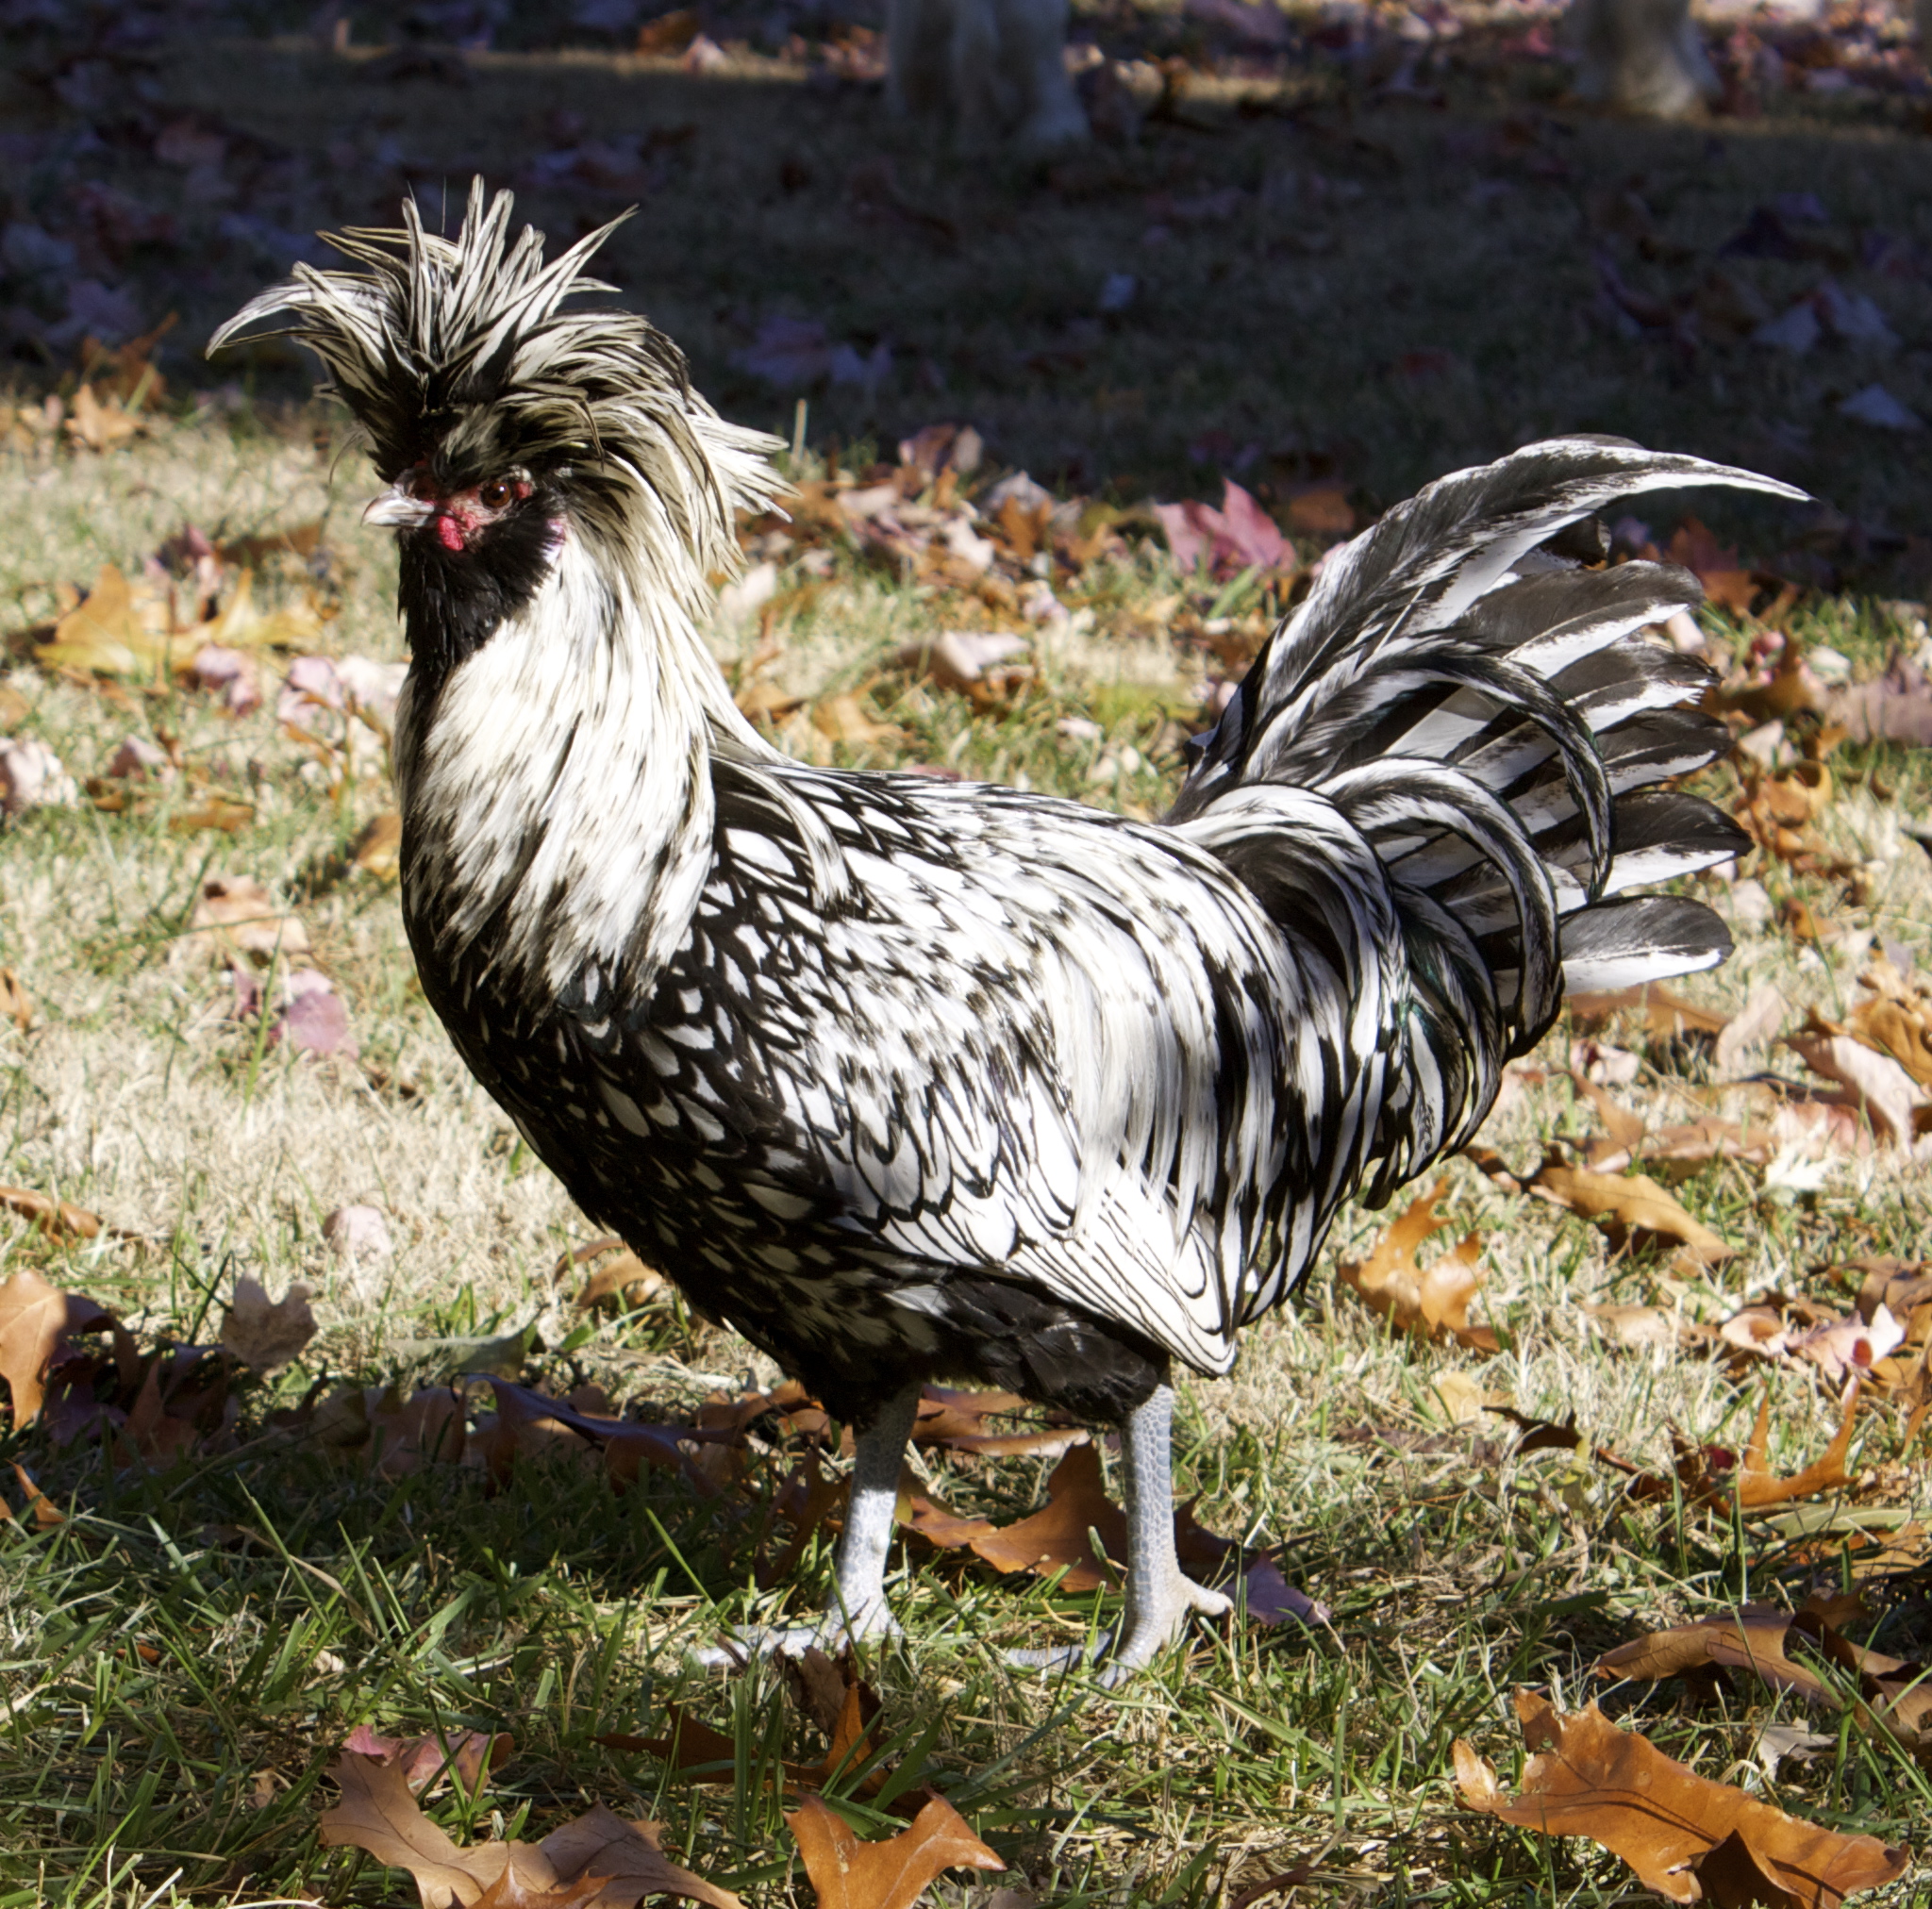 Young Silver Laced Polish Rooster, "Bubblehead" great attitude and bird all around!